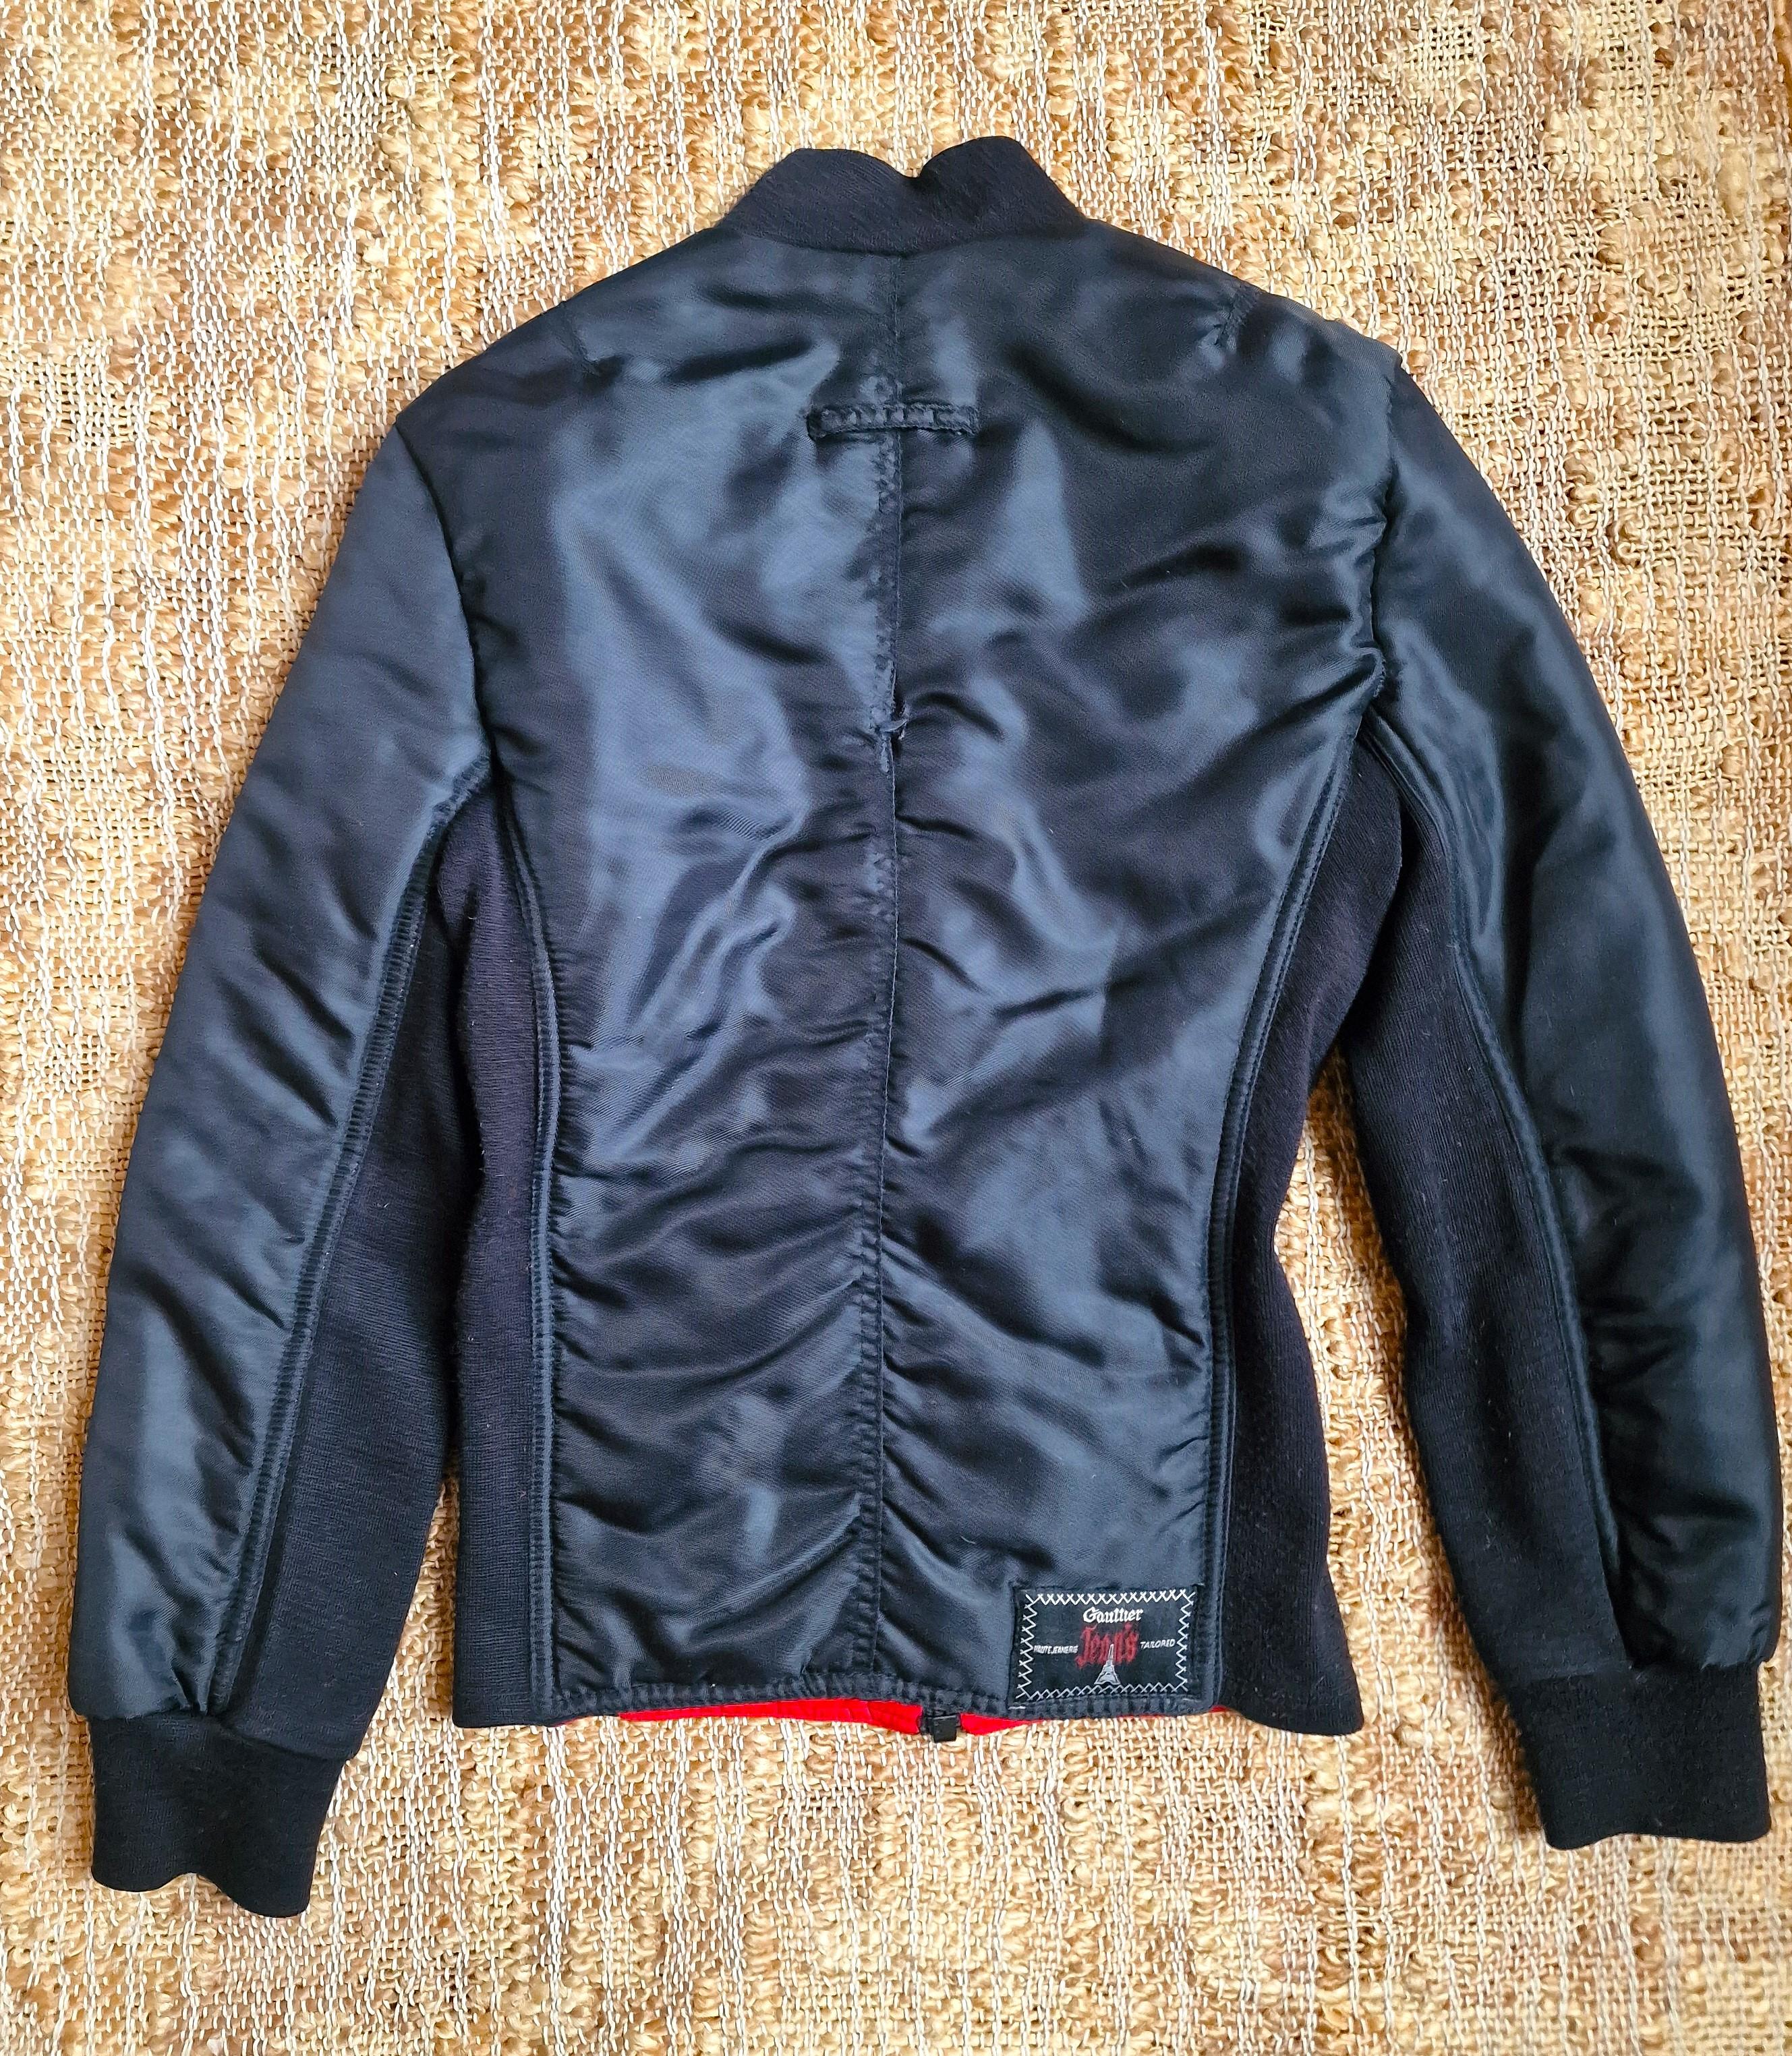 Black nylon 6-pack muscle puffer jacket by Jean Paul Gaultier! 

A unique find from the Gaultier Jeans line, this nylon puffer jacket features knit details and six front pockets positioned to replicate 6-pack abdominal muscles.
Crew neck
Six flap